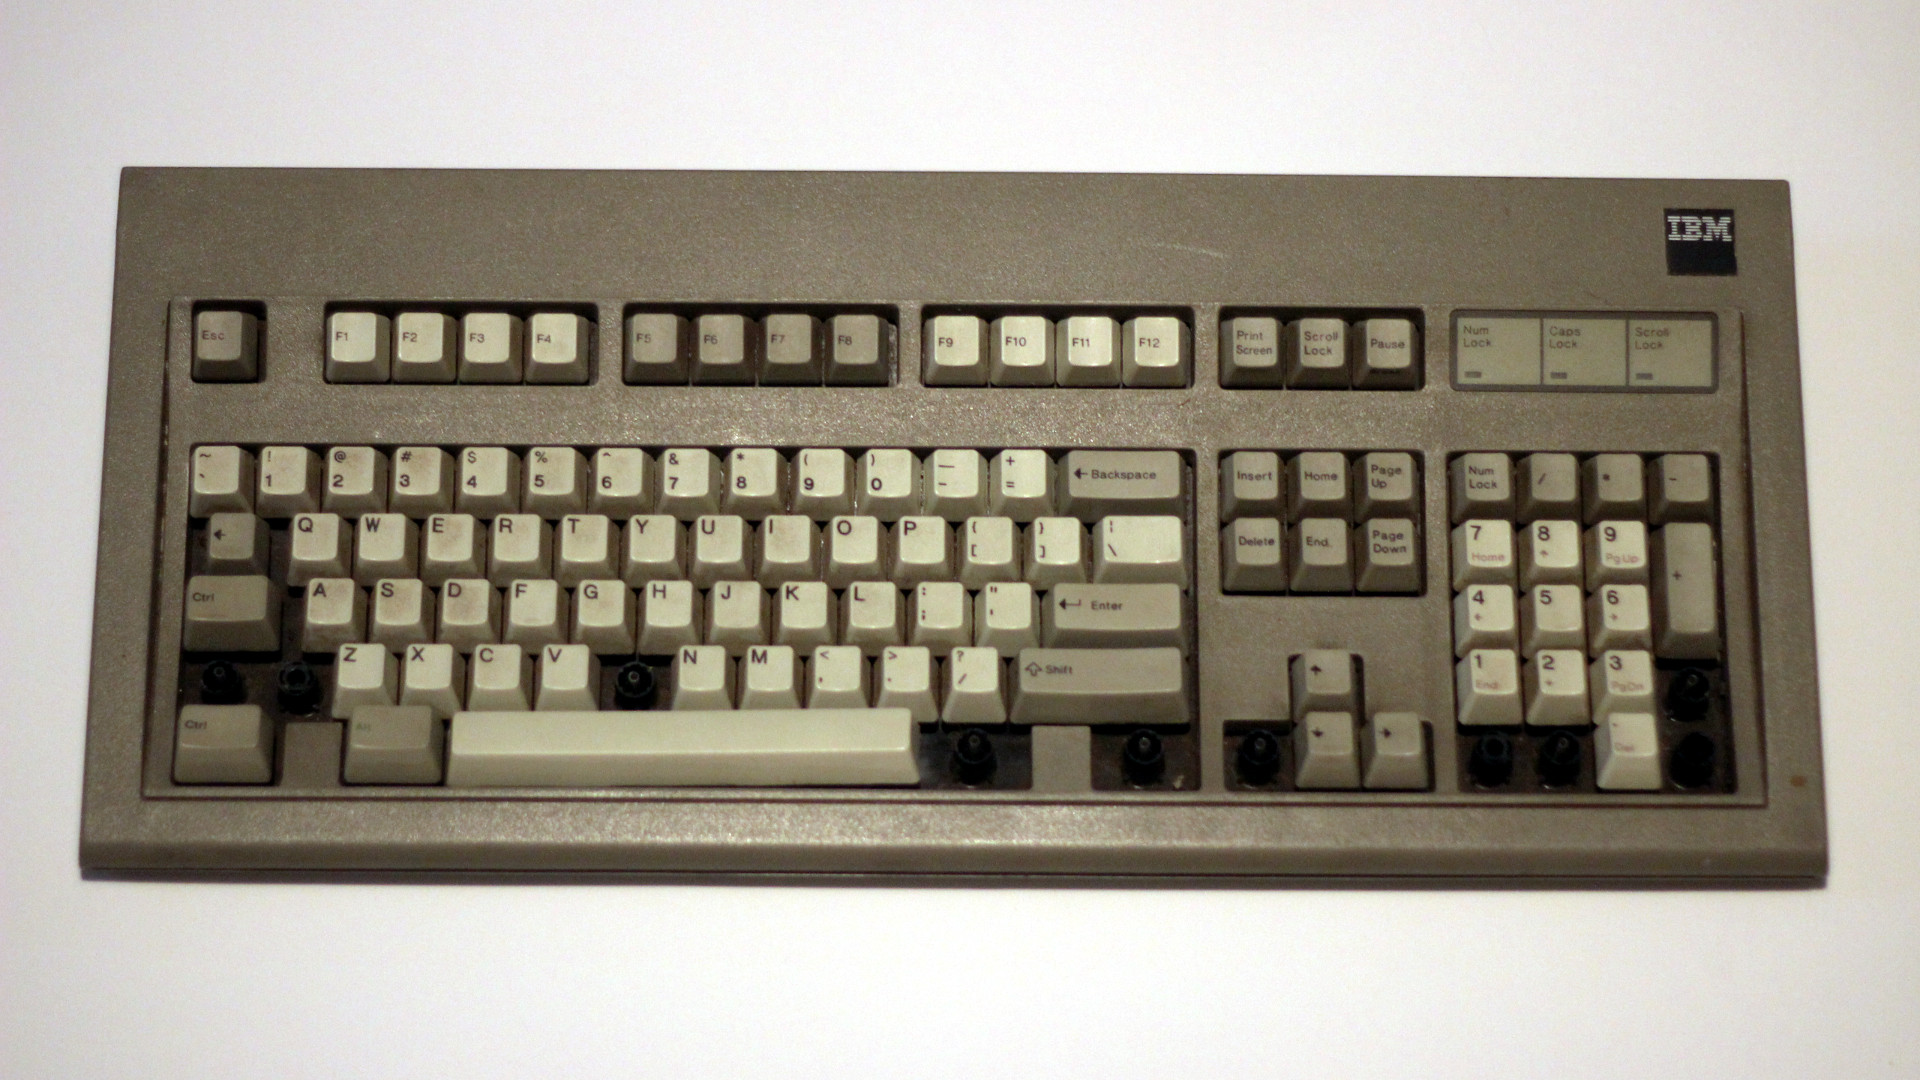 I used an inexpensive IBM Model M 1390120 from 1986 as donor for the missing key caps.